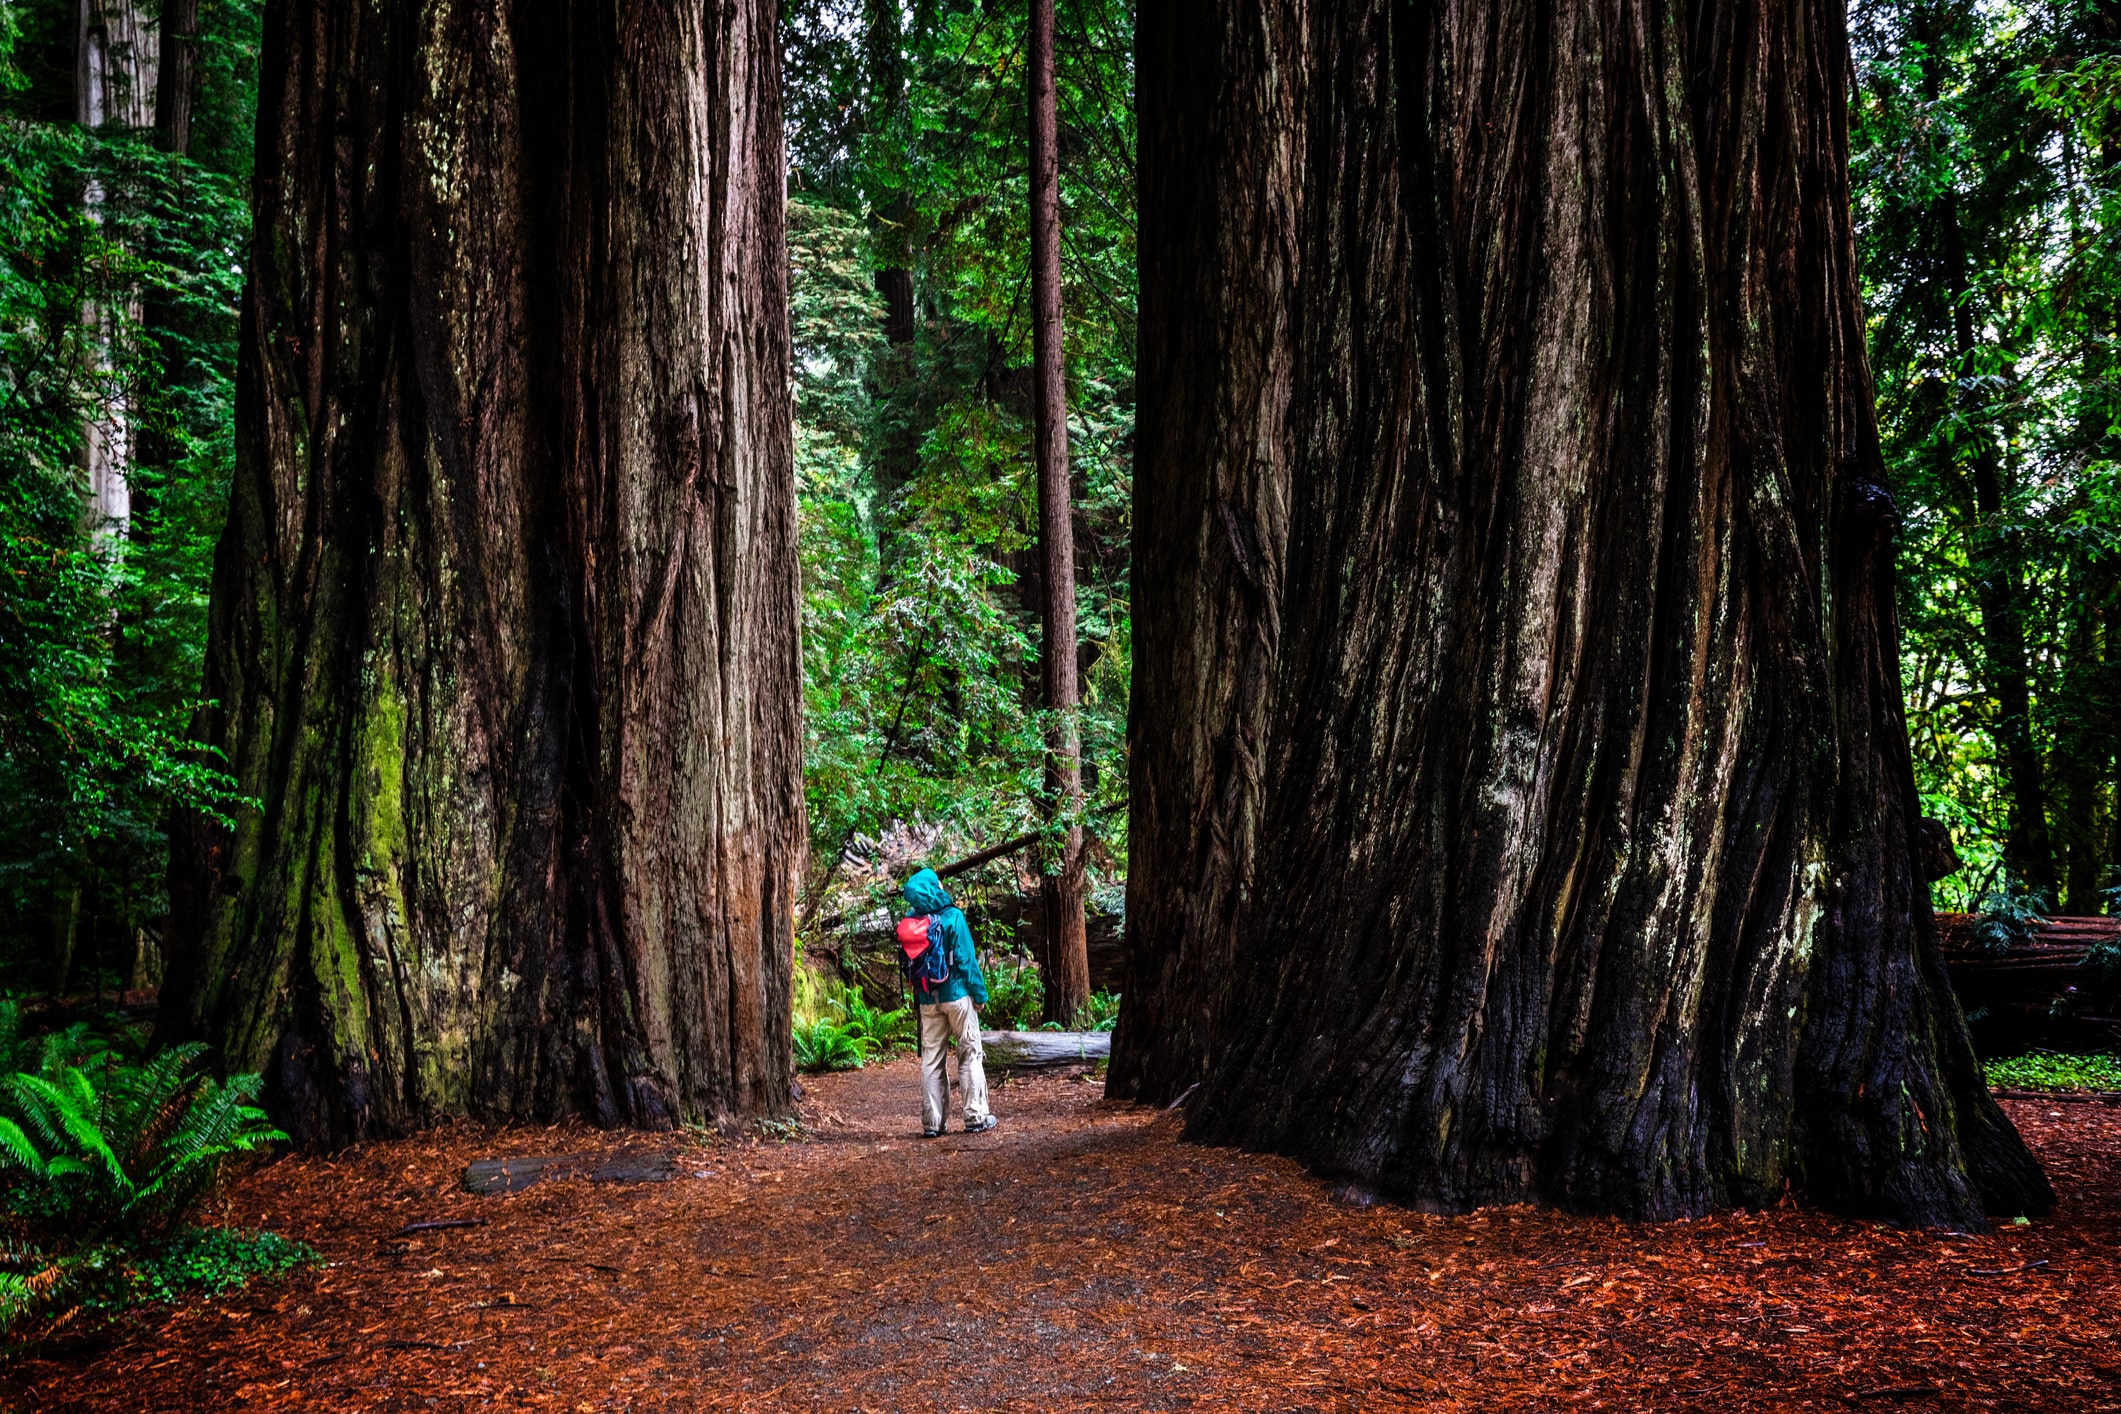 Hiker on trail through Redwoods Forest in California.